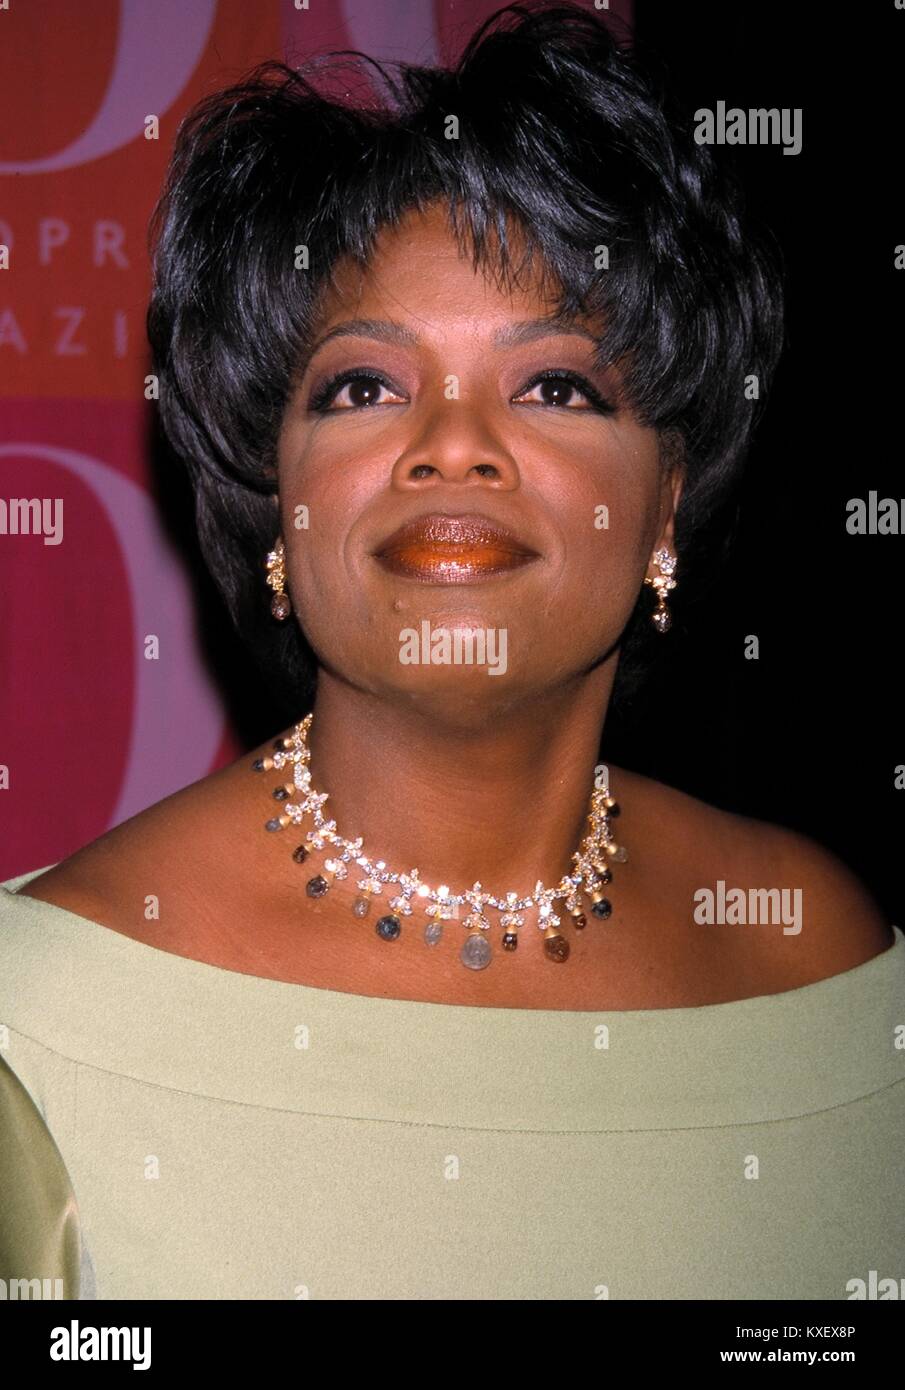 RTMcbride / MedaPunch  OPRAH WINFREY, GAYLE KING  AND HEARST MAGAZINES  4/17/2001 HOST THEIR 1st ANNIVERSARY OF  O  MAGAZINE.  CIPRIANI RESTAURANT IN NEW YORK CITY. CREDIT ALL USES Stock Photo